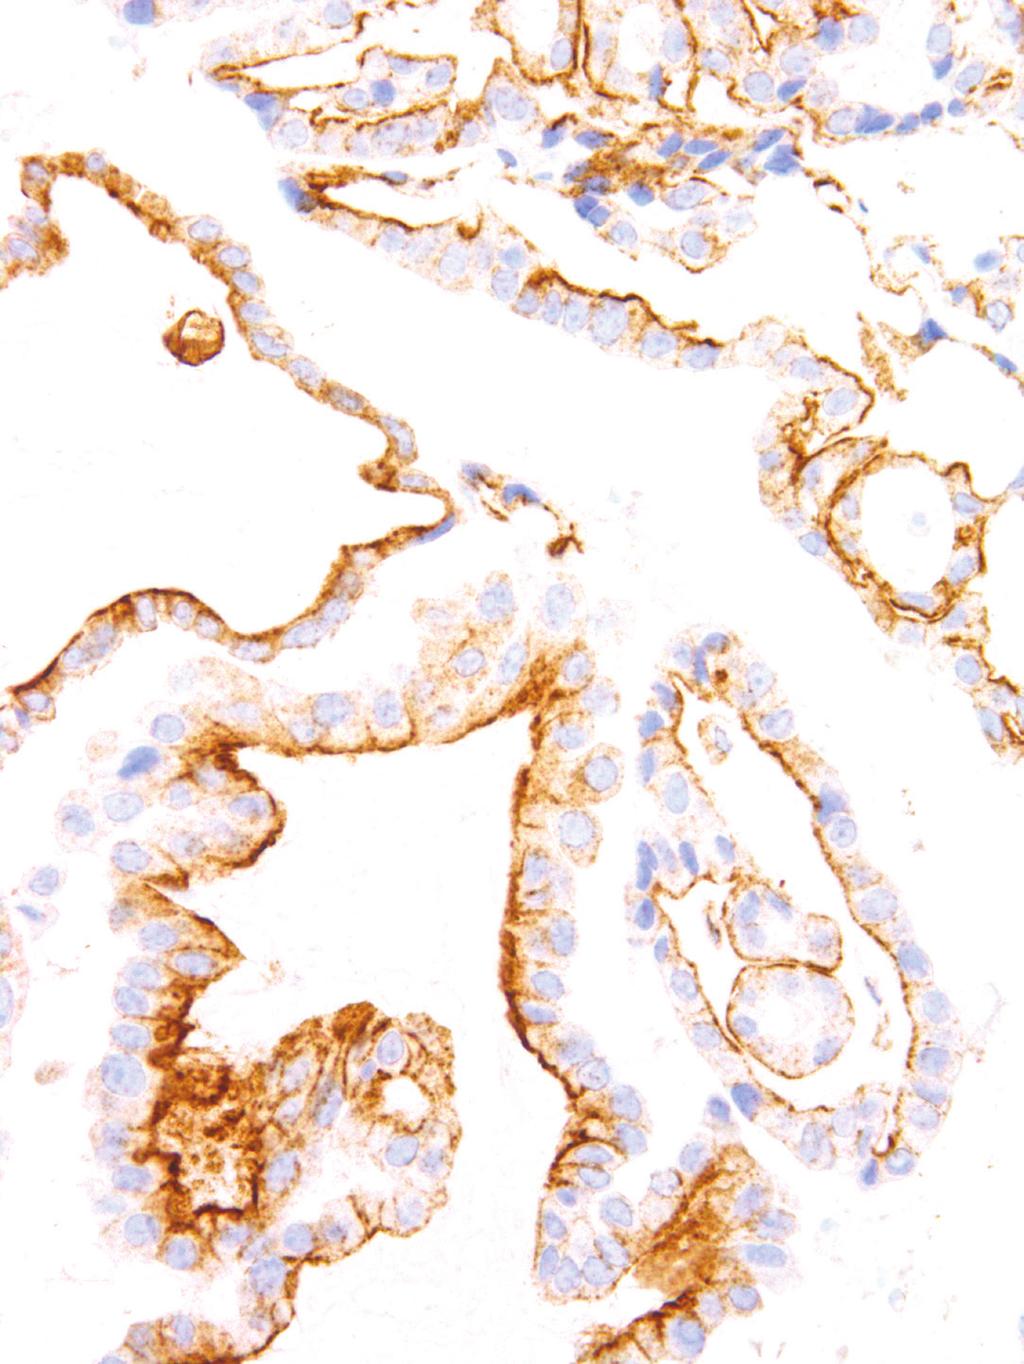 GeneAb TM BRAF V600E Clone: IHC600 Source: Mouse Monoclonal Positive Control: Colorectal Adenocarcinoma 1. Intended Use This antibody is intended for in vitro diagnostic (IVD) use.